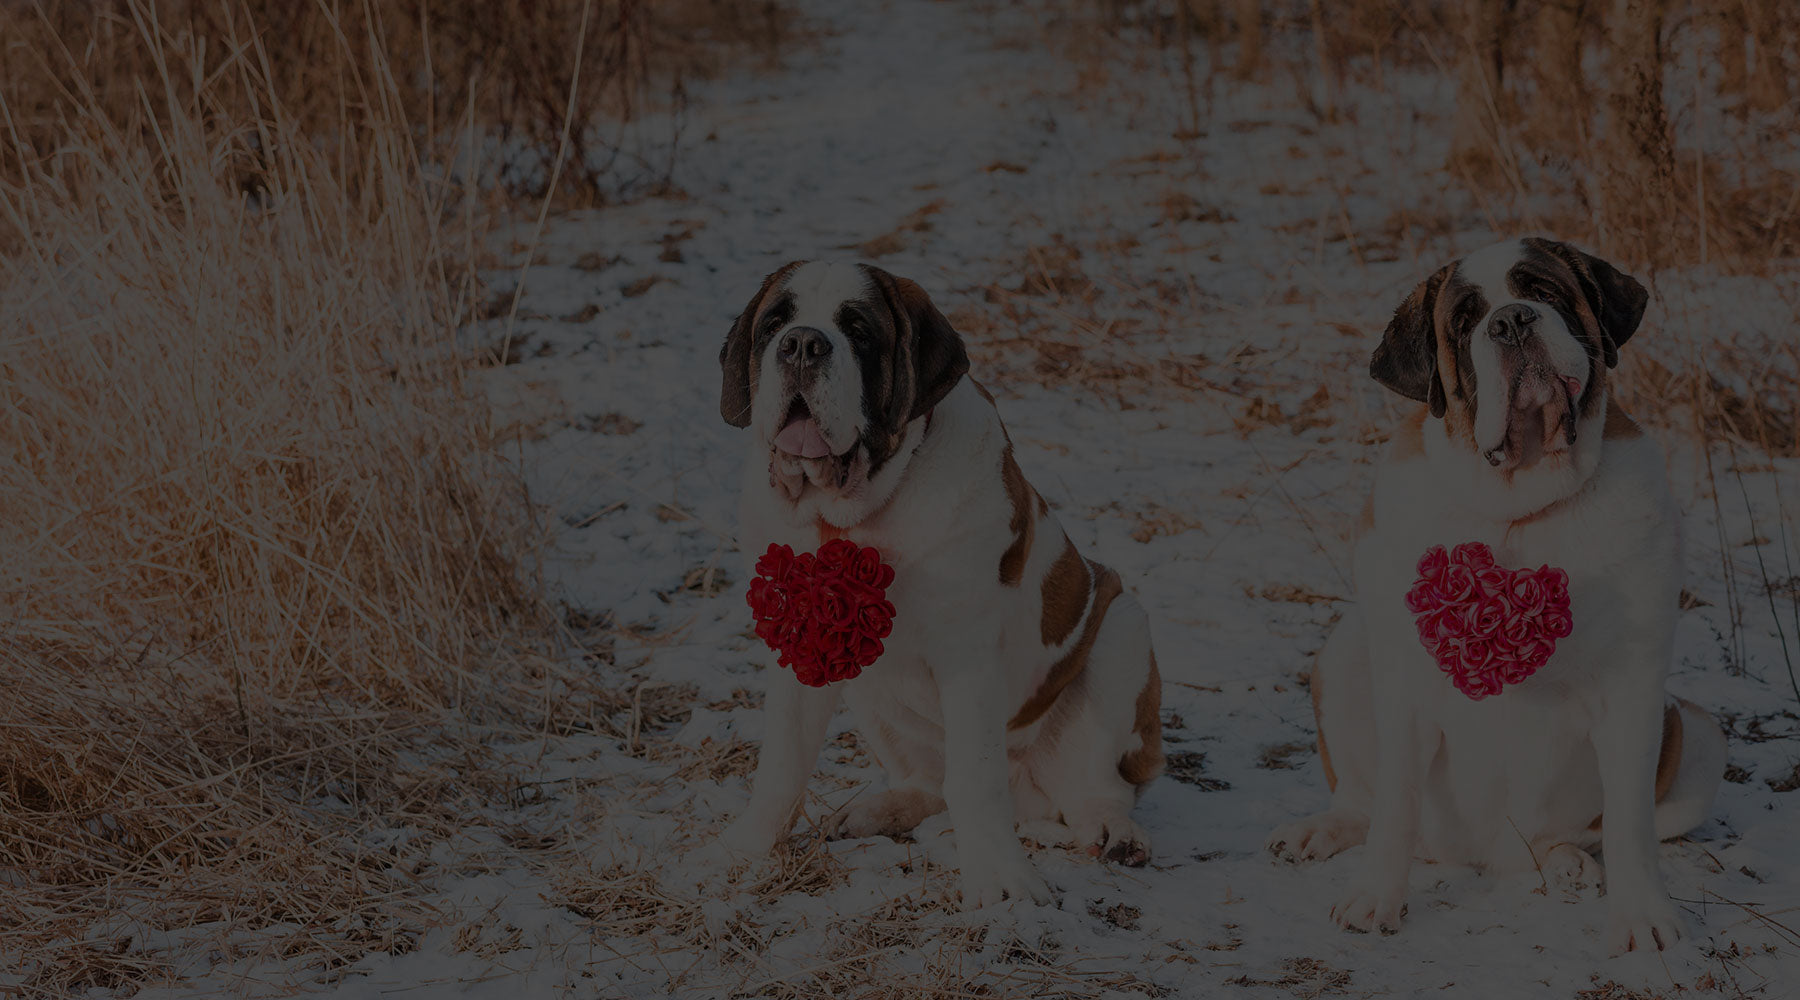 About Saint Bernards Lucy and Norman